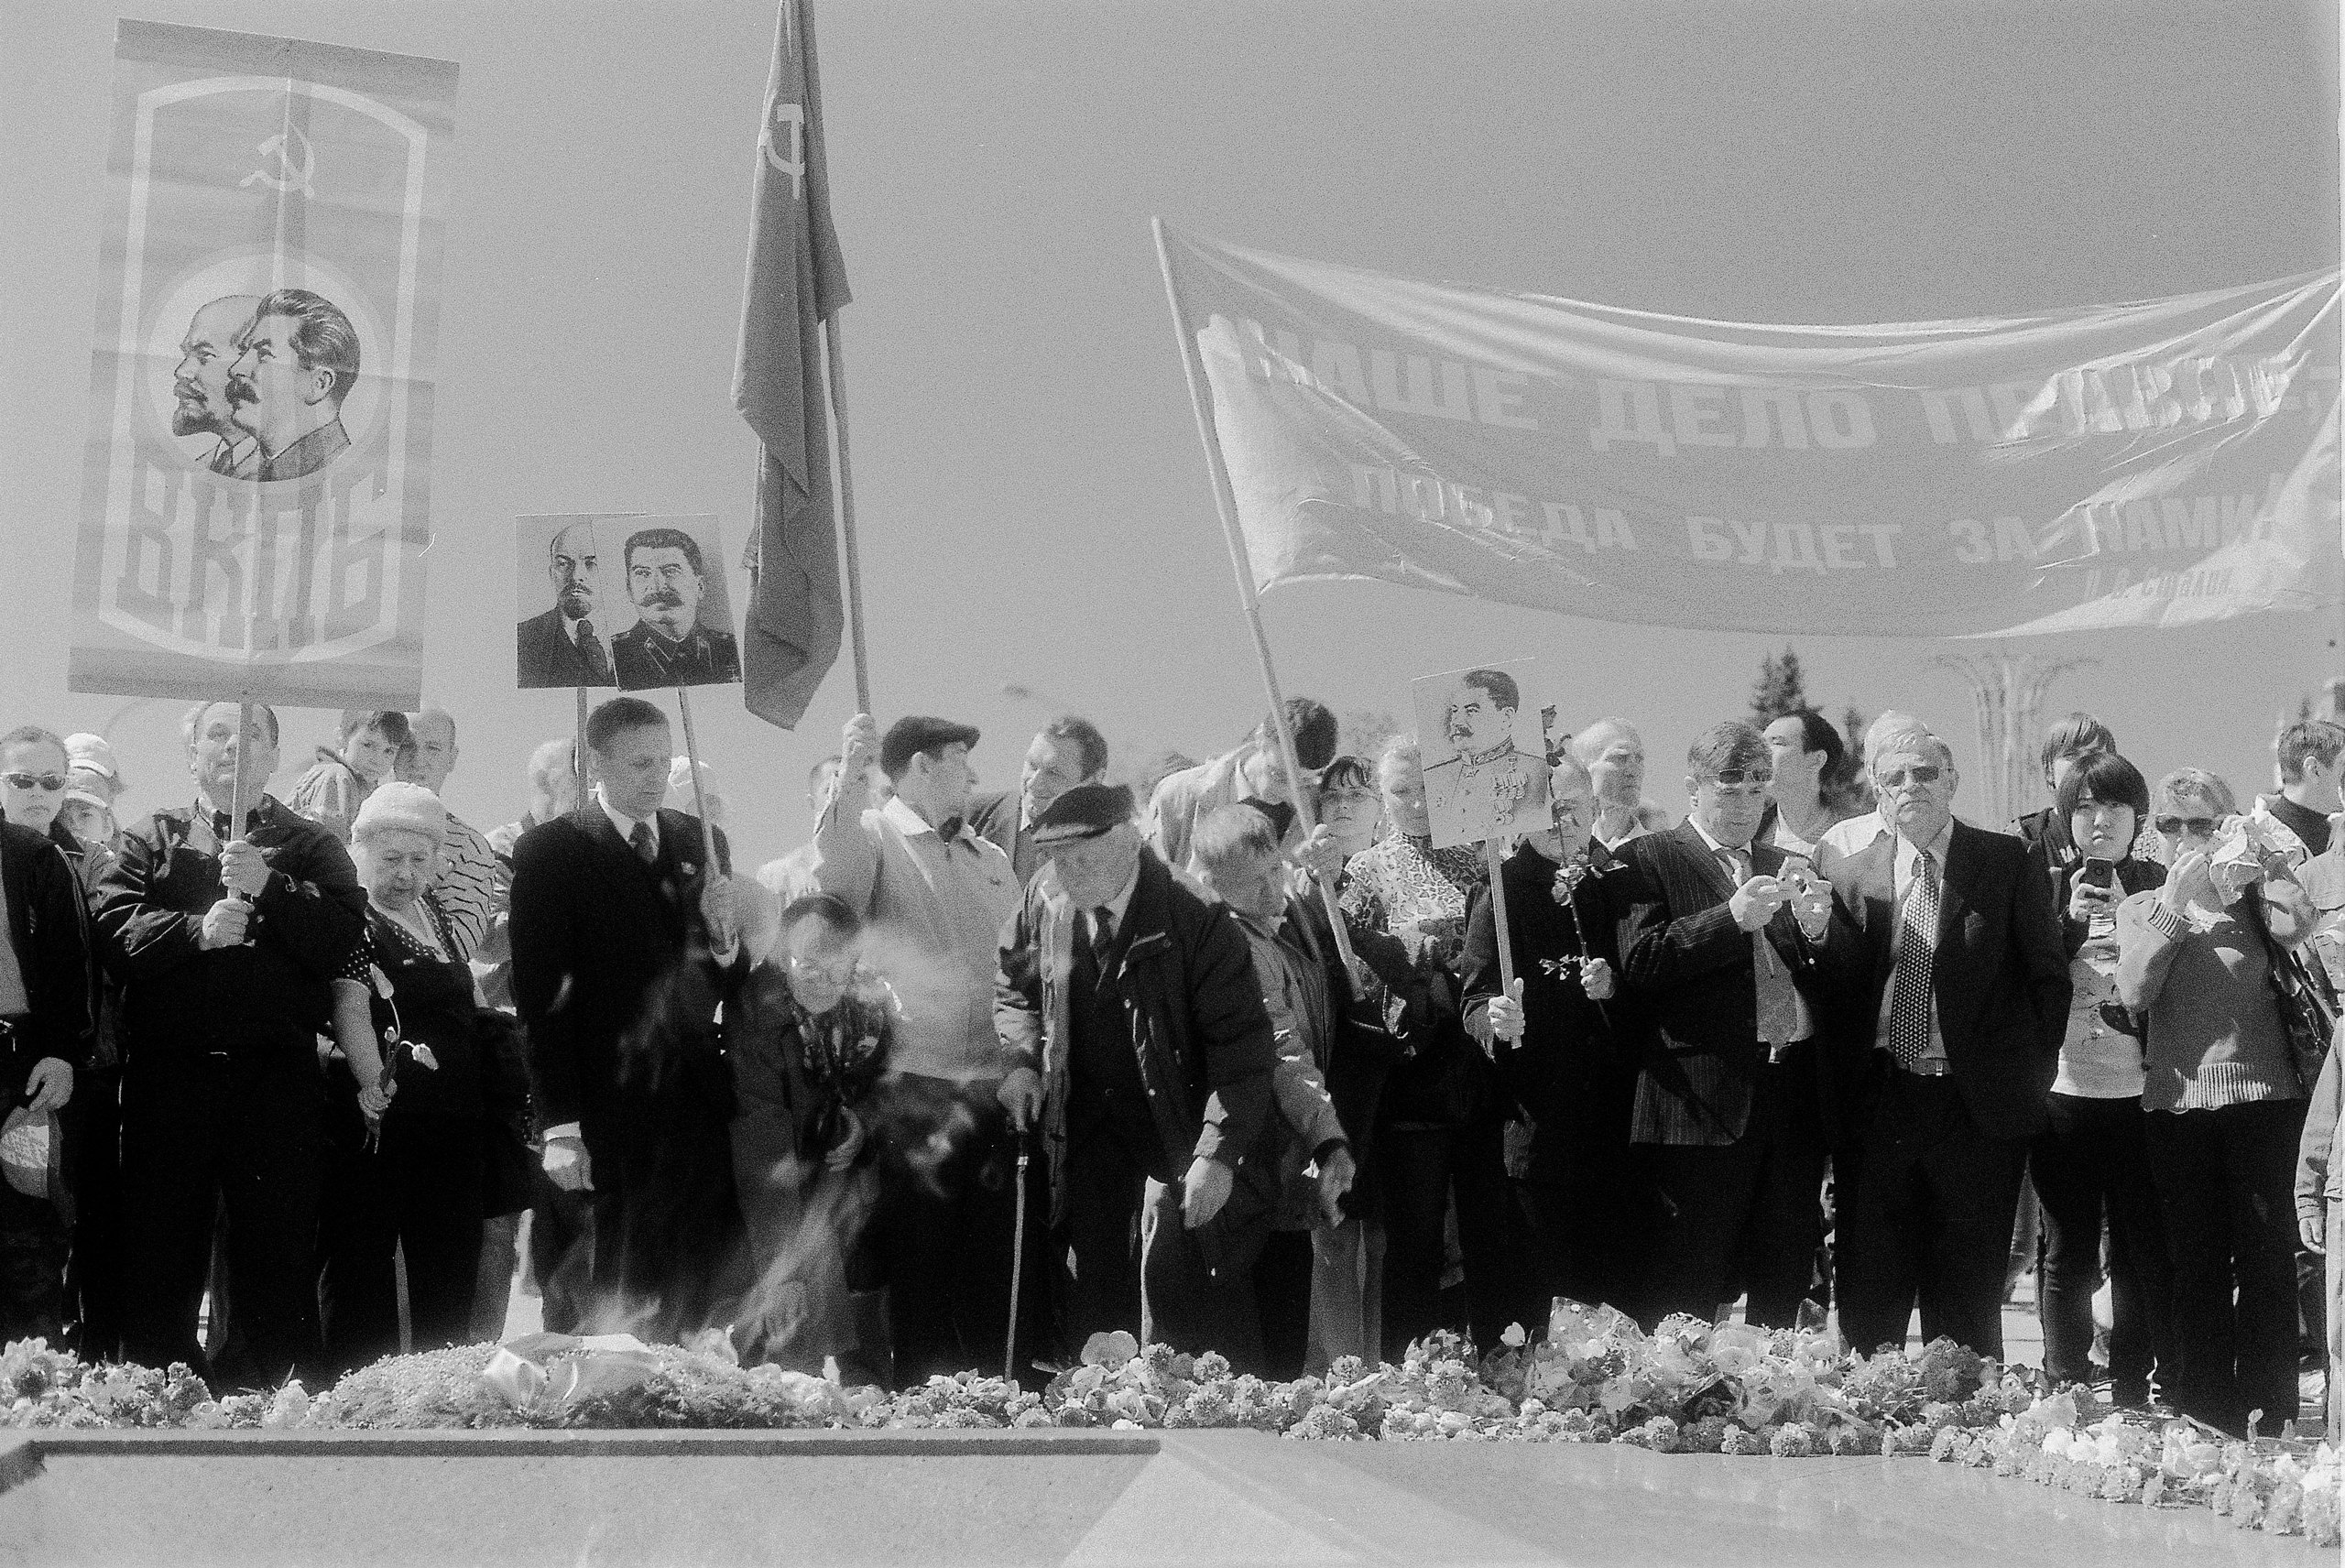 Veterans of the Soviet Army and members of the Communist Party with red flags, St. George ribbons and portraits of Lenin and Stalin lay flowers on the Eternal Flame during the Victory Day celebrations